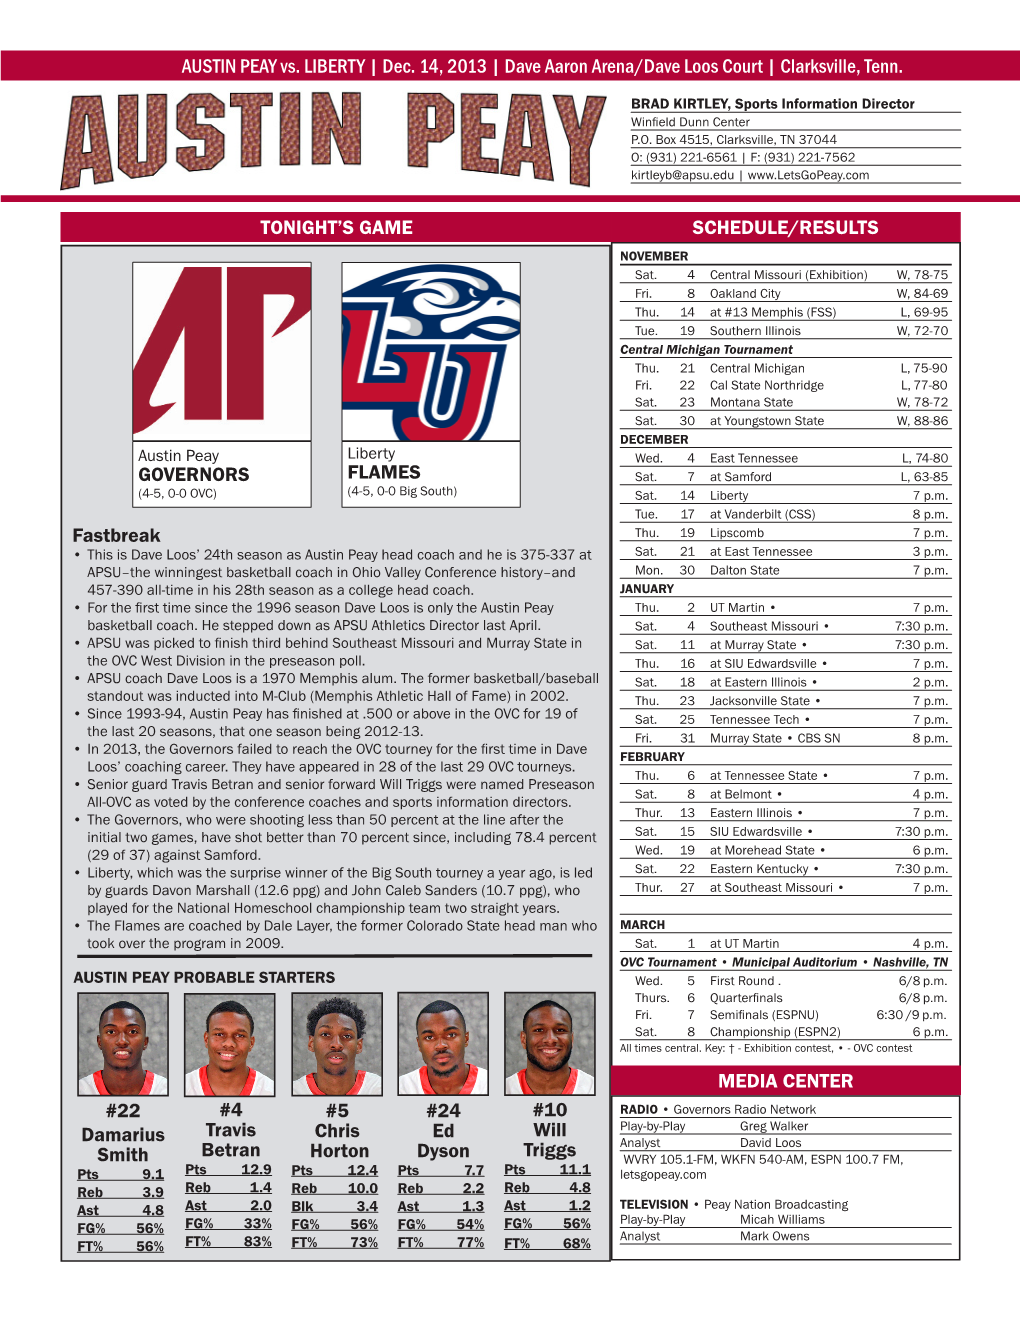 25 #25 AUSTIN PEAY Vs. LIBERTY | Dec. 14, 2013 | Dave Aaron Arena/Dave Loos Court | Clarksville, Tenn. SCHEDULE/RESULTS MEDIA C